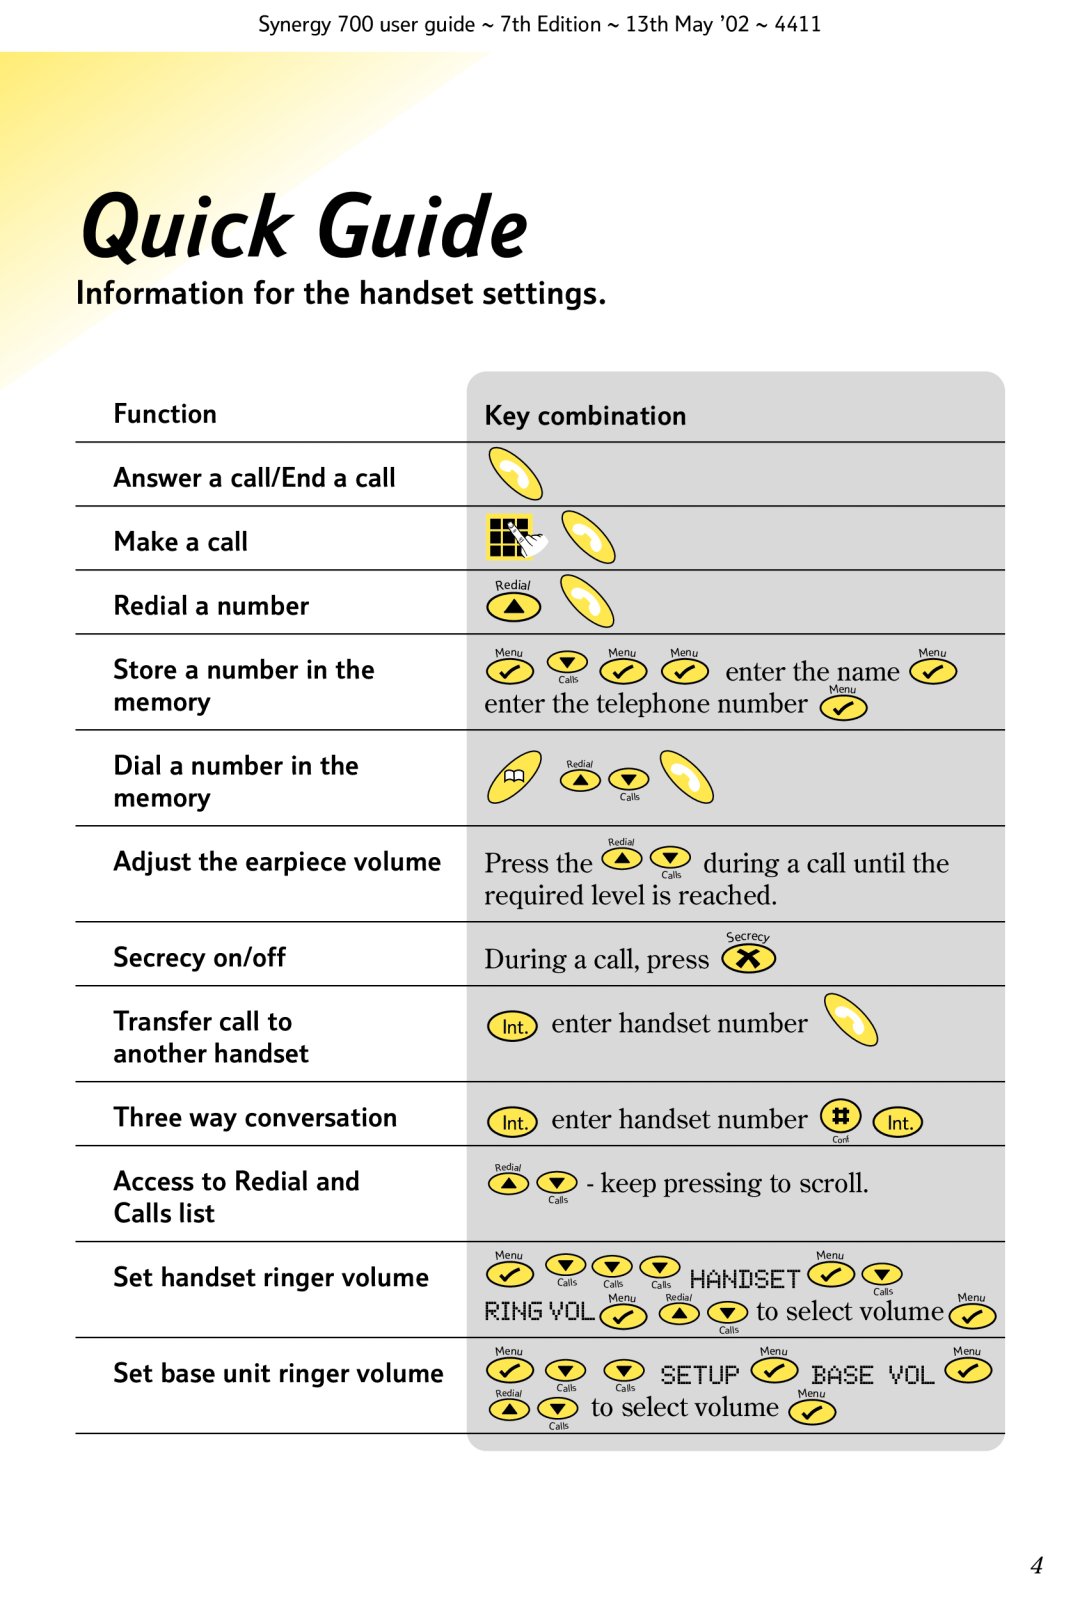 BT Synergy 700 Quick Guide, Information for the handset settings, Function, Key combination, enter the name, Press the 